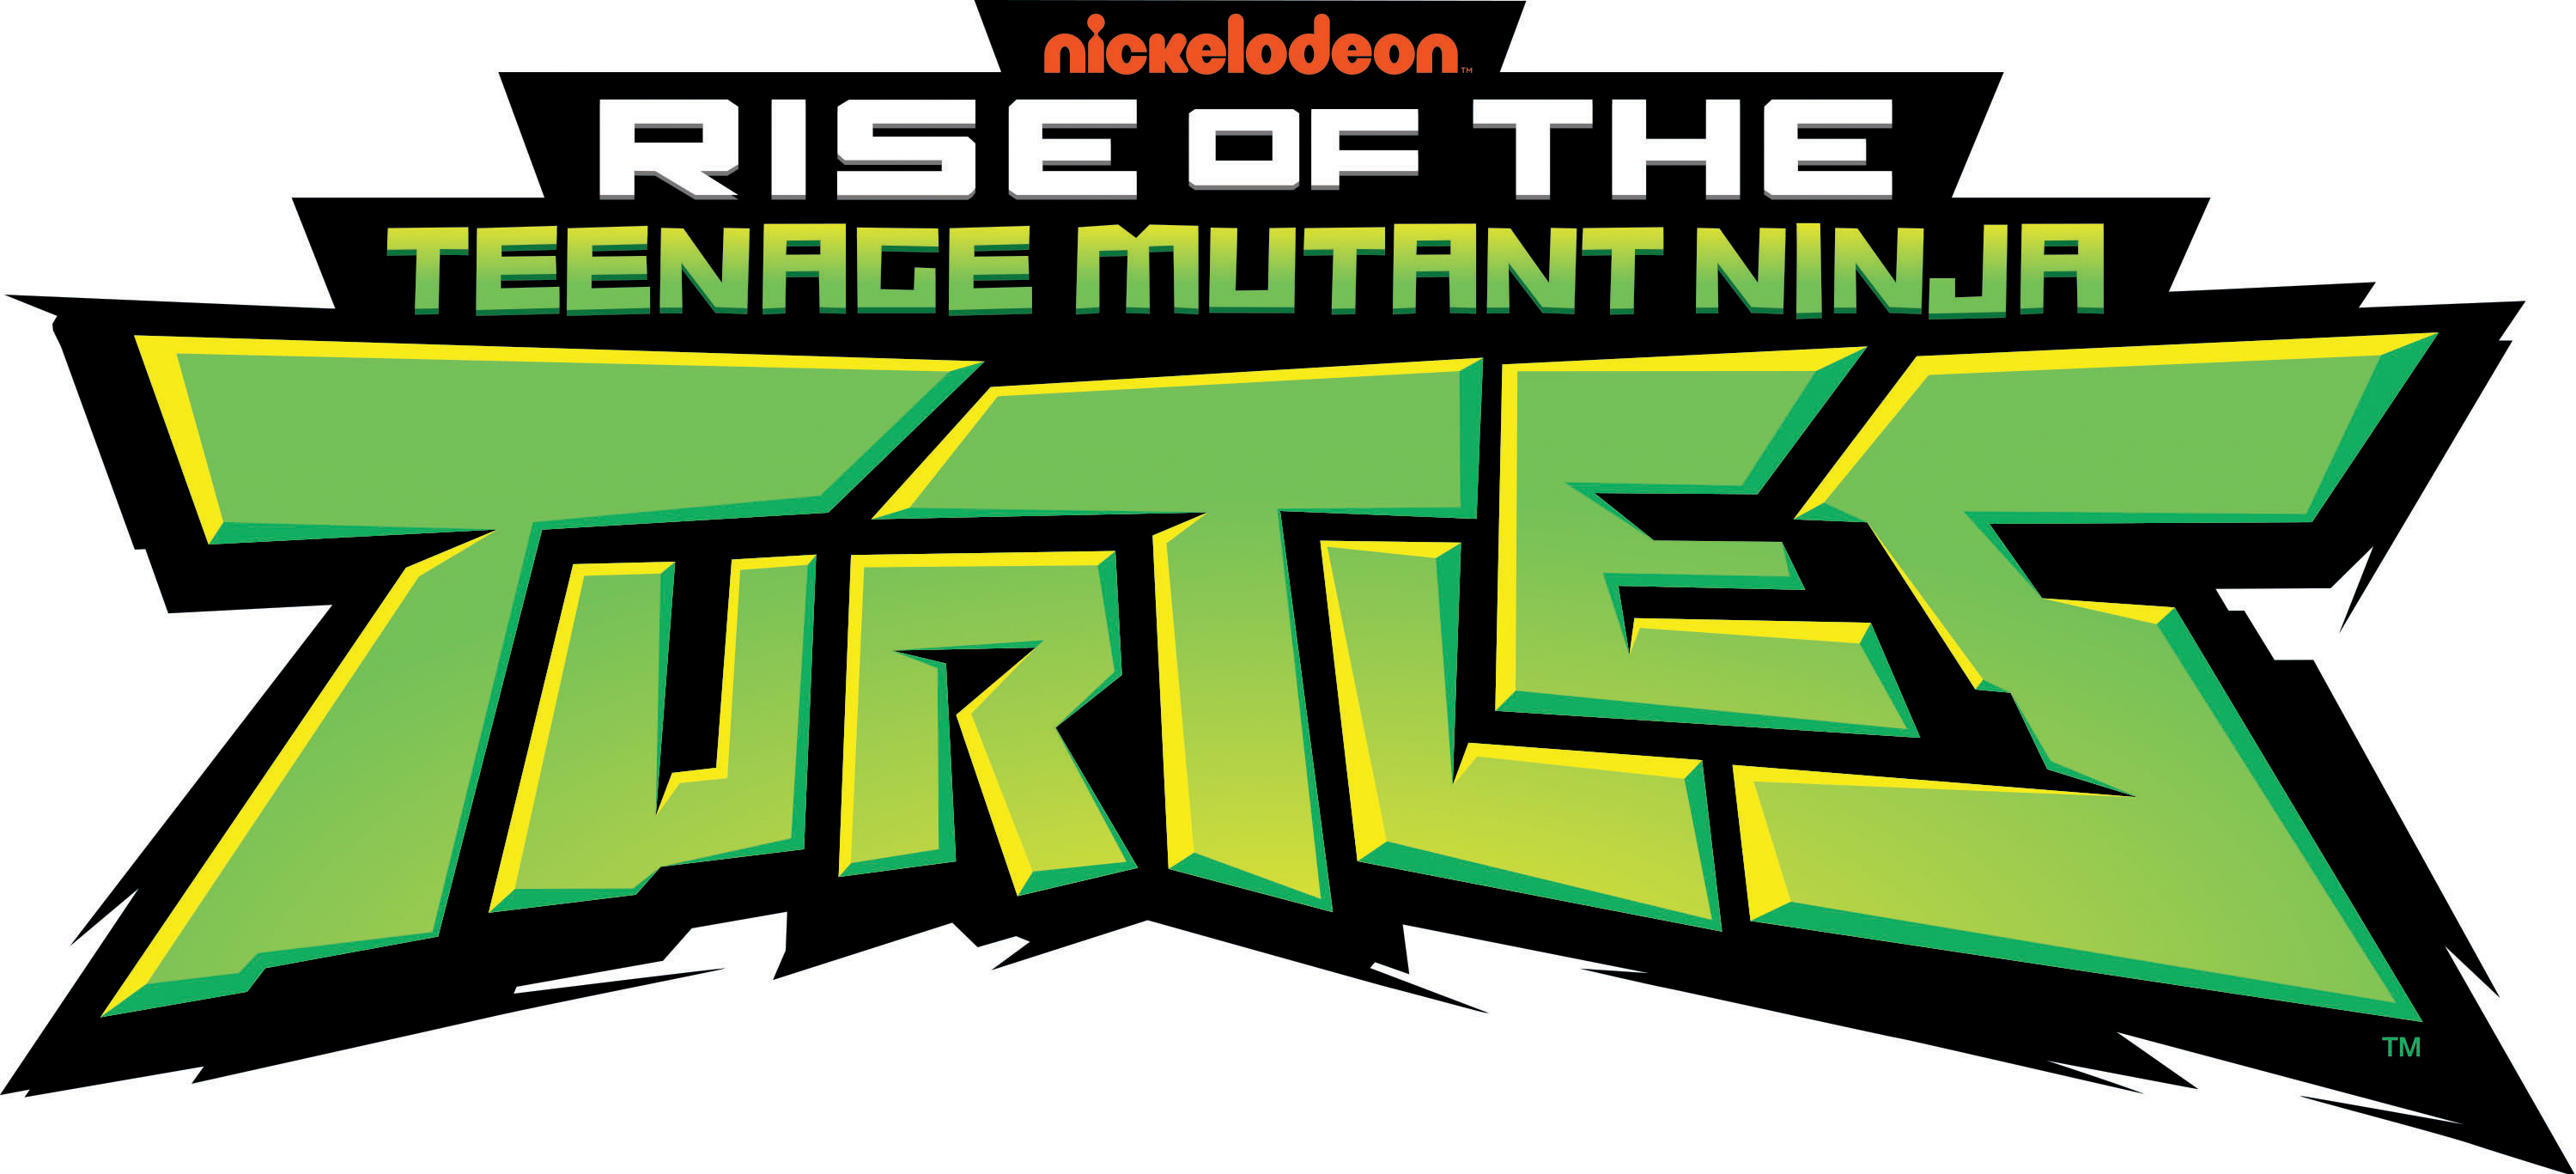 Nickelodeon’s Rise of the Teenage Mutant Ninja Turtles Toys are Coming October 1 from Playmates Toys